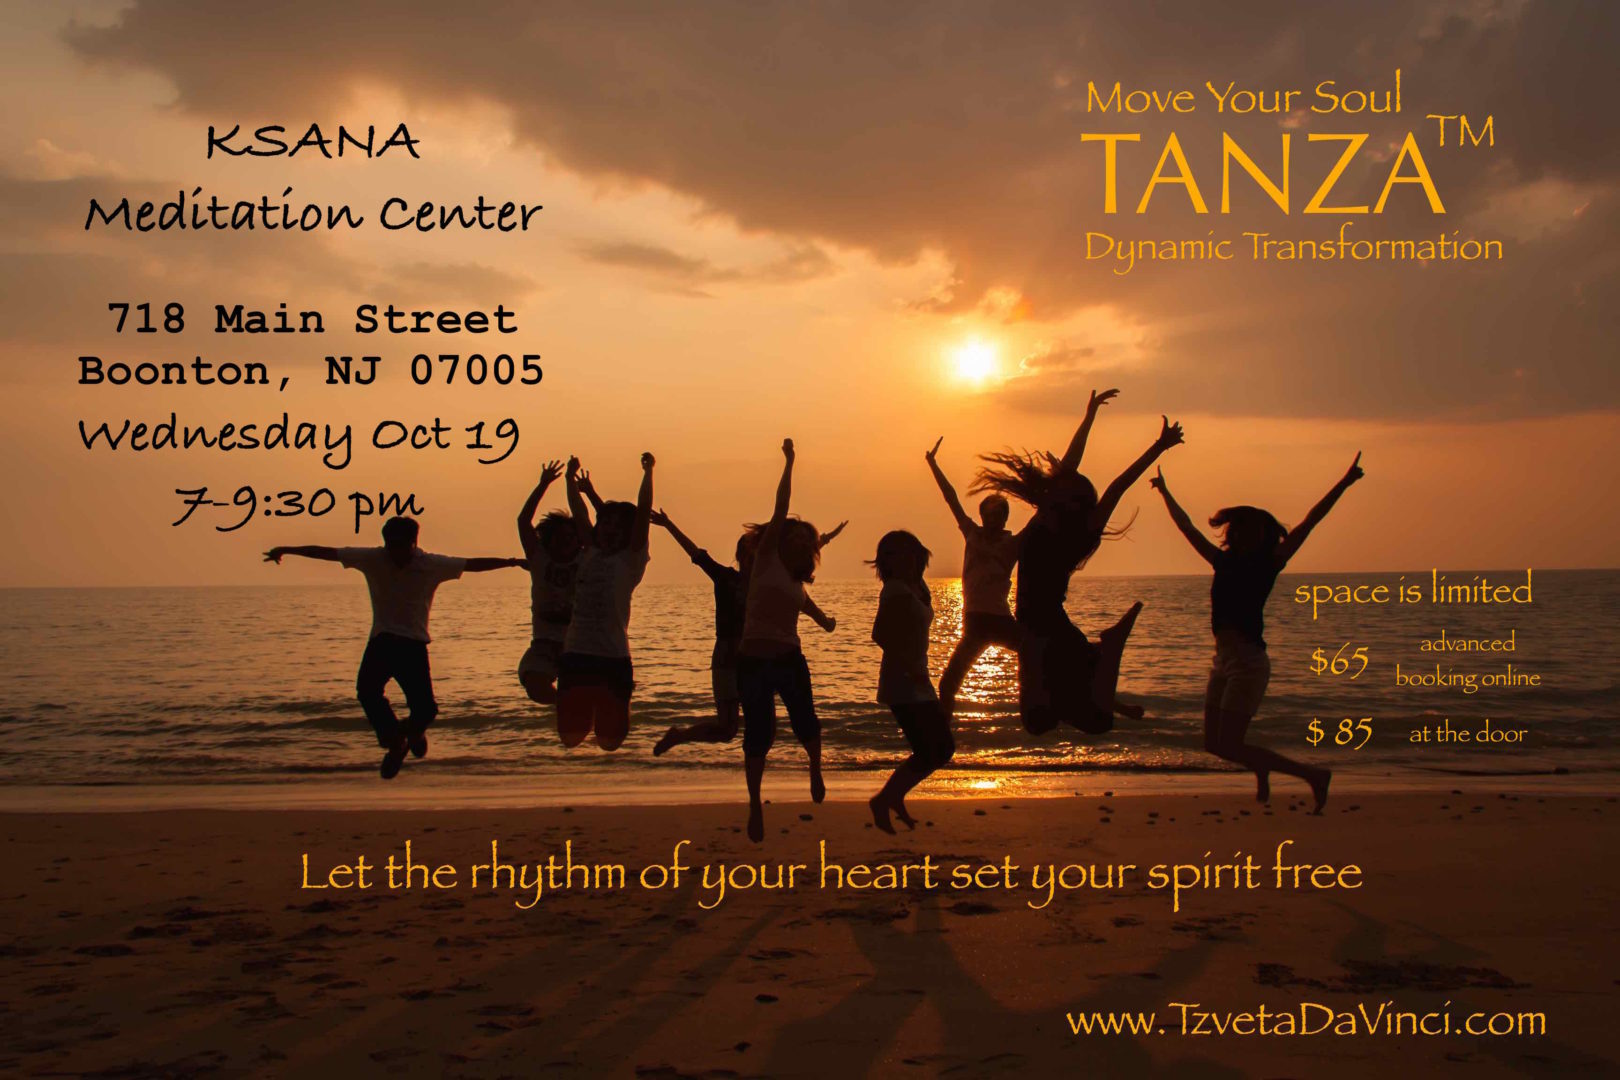 Move Your Soul with TANZA - Dynamic Transformation - Ksana Meditation Center - An Open Space for Healing & Growth